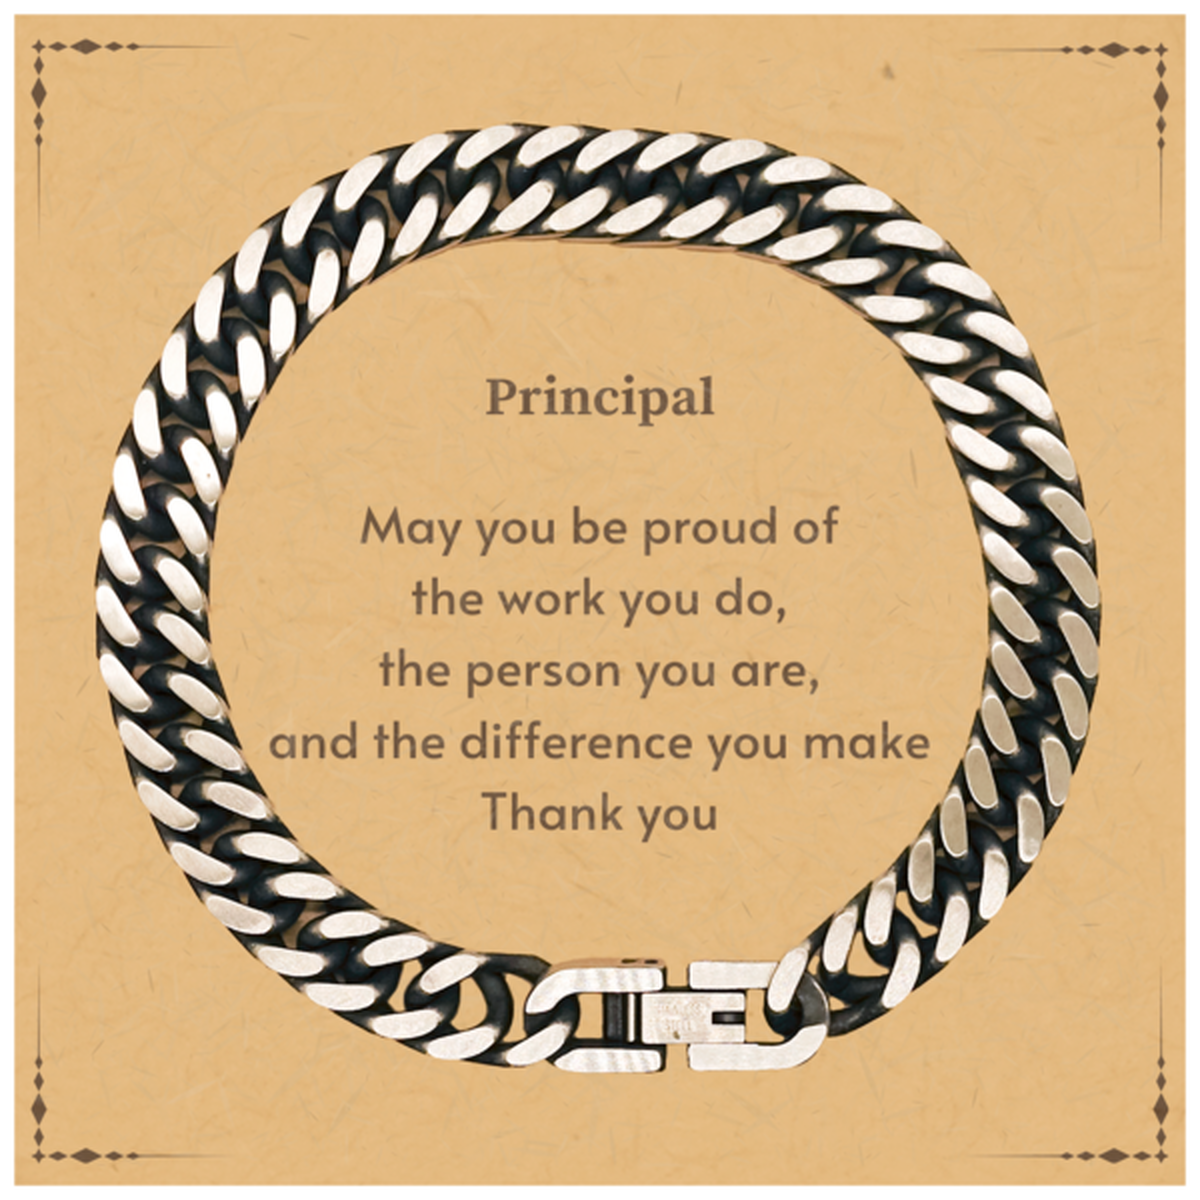 Heartwarming Cuban Link Chain Bracelet Retirement Coworkers Gifts for Principal, Principal May You be proud of the work you do, the person you are Gifts for Boss Men Women Friends